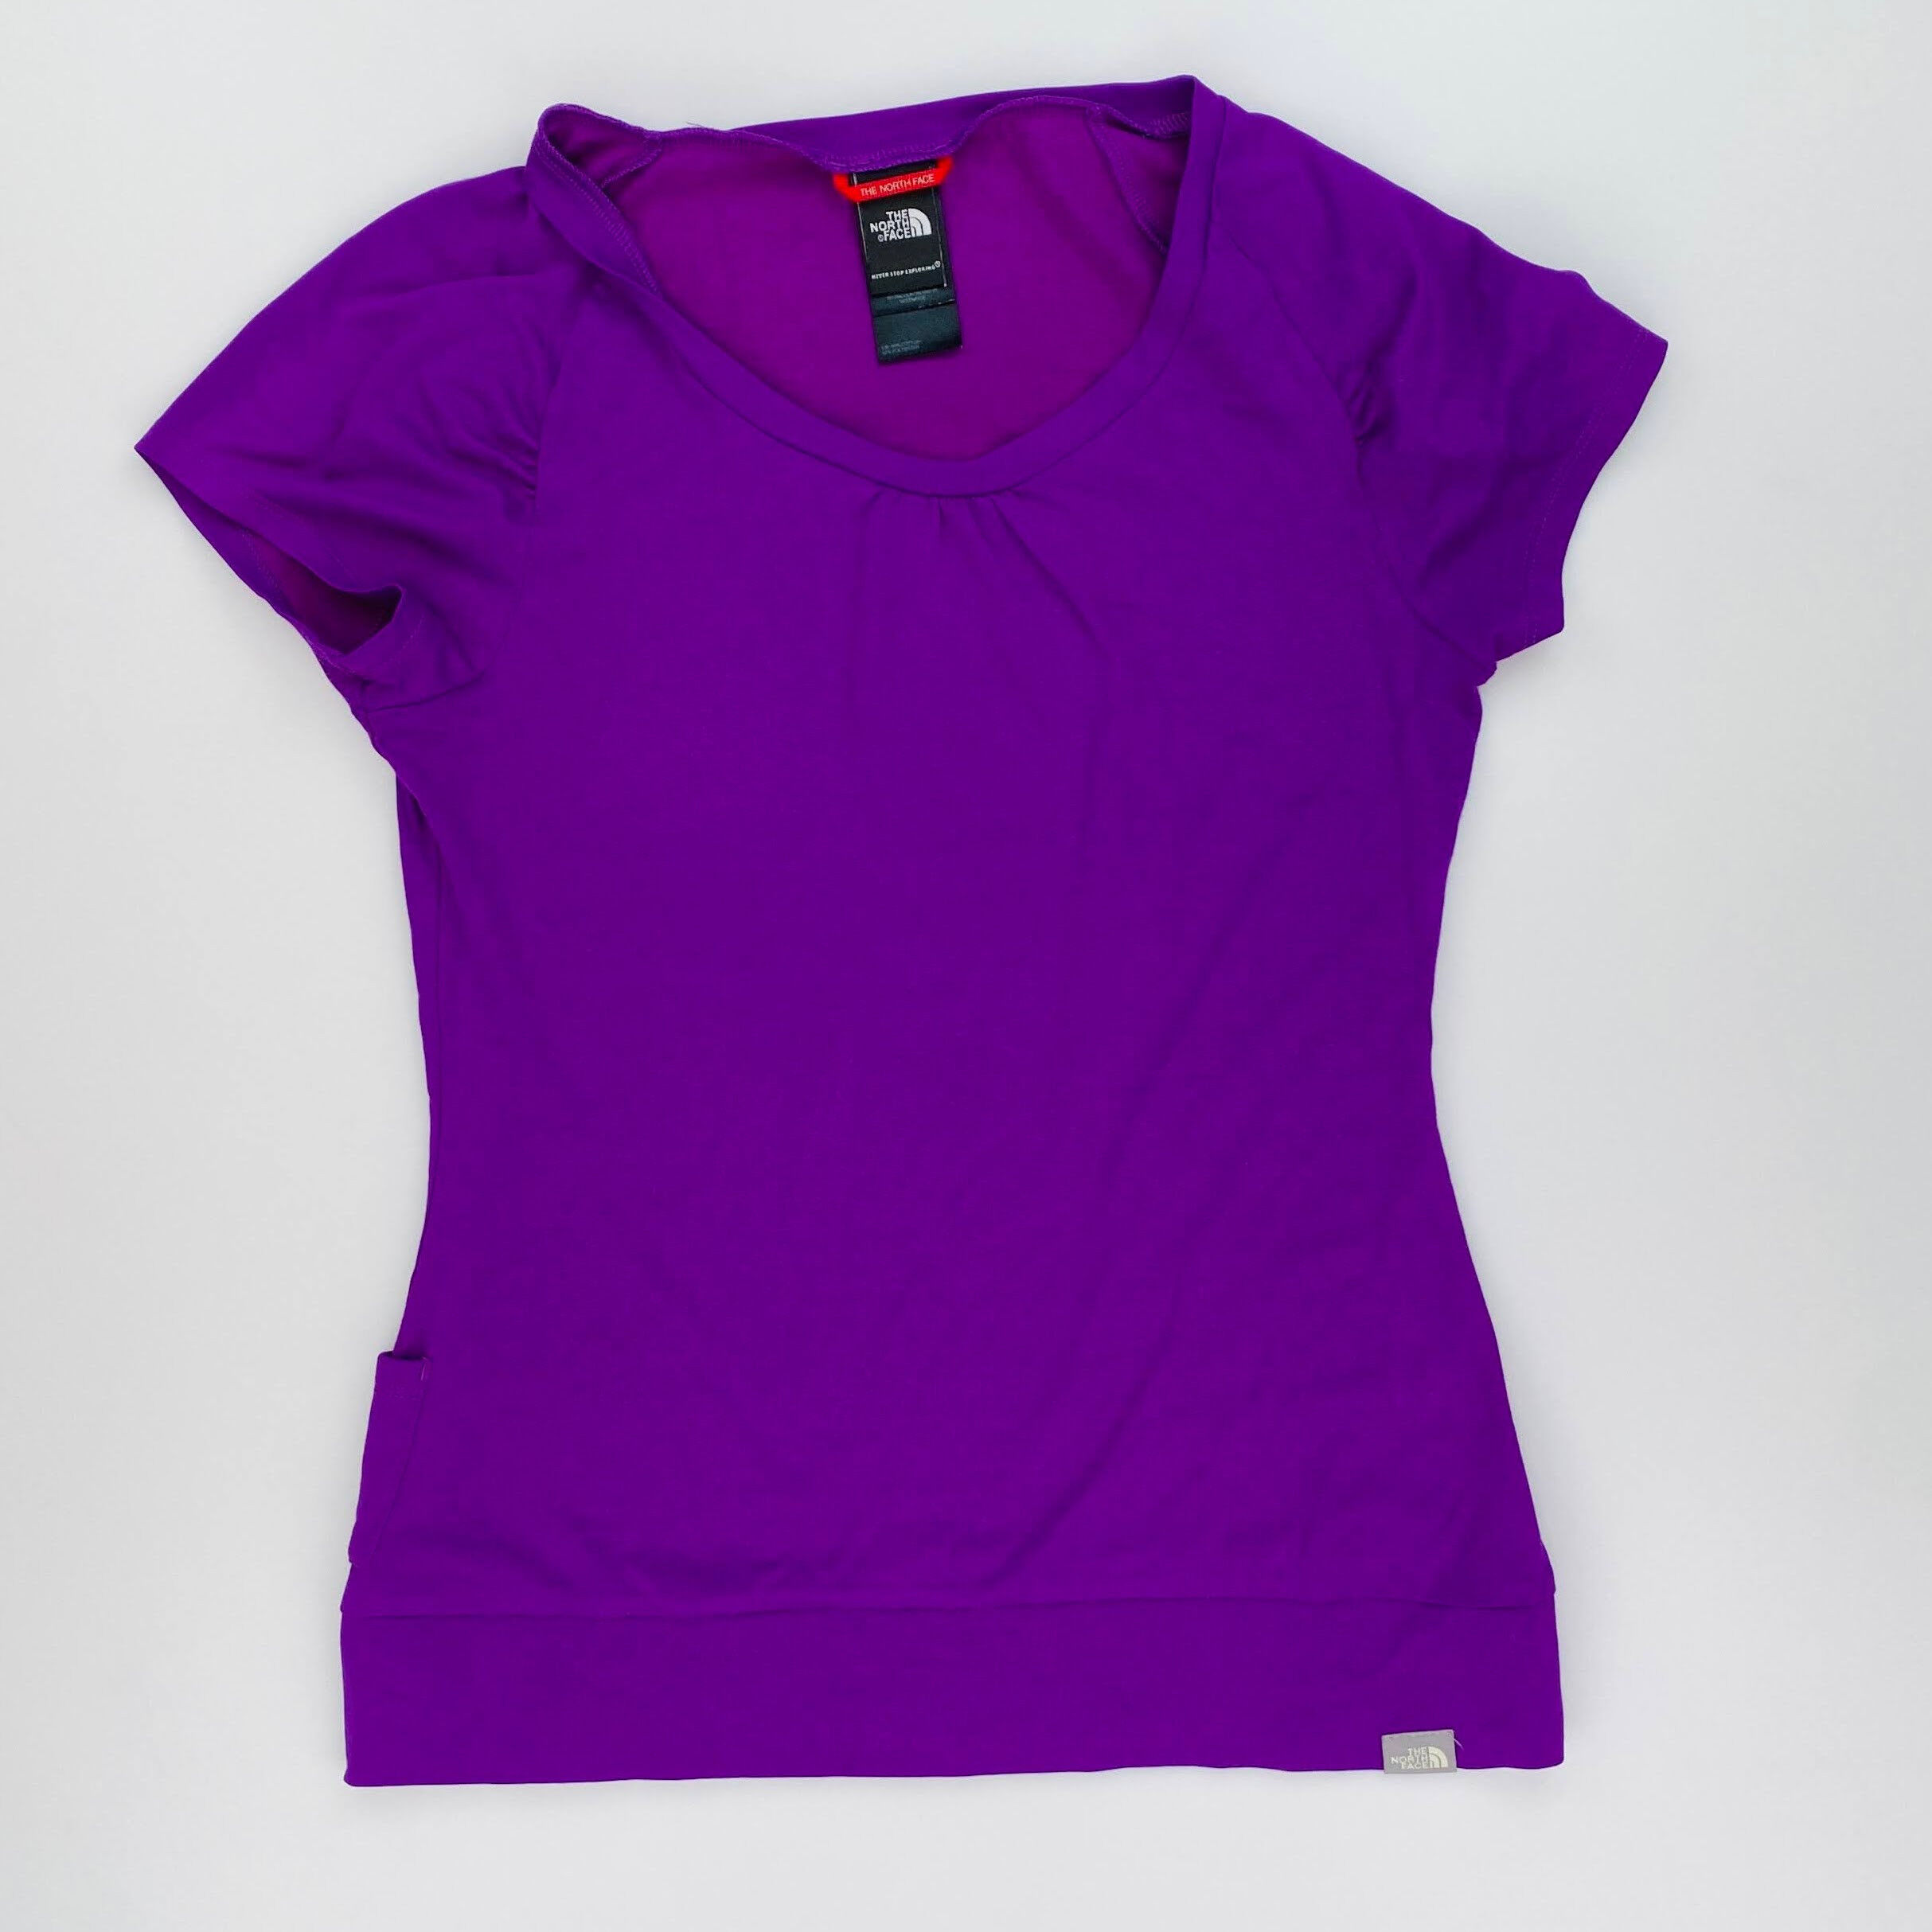 The North Face Tshirt Ambition - Second Hand T-shirt - Women's - Purple - S | Hardloop